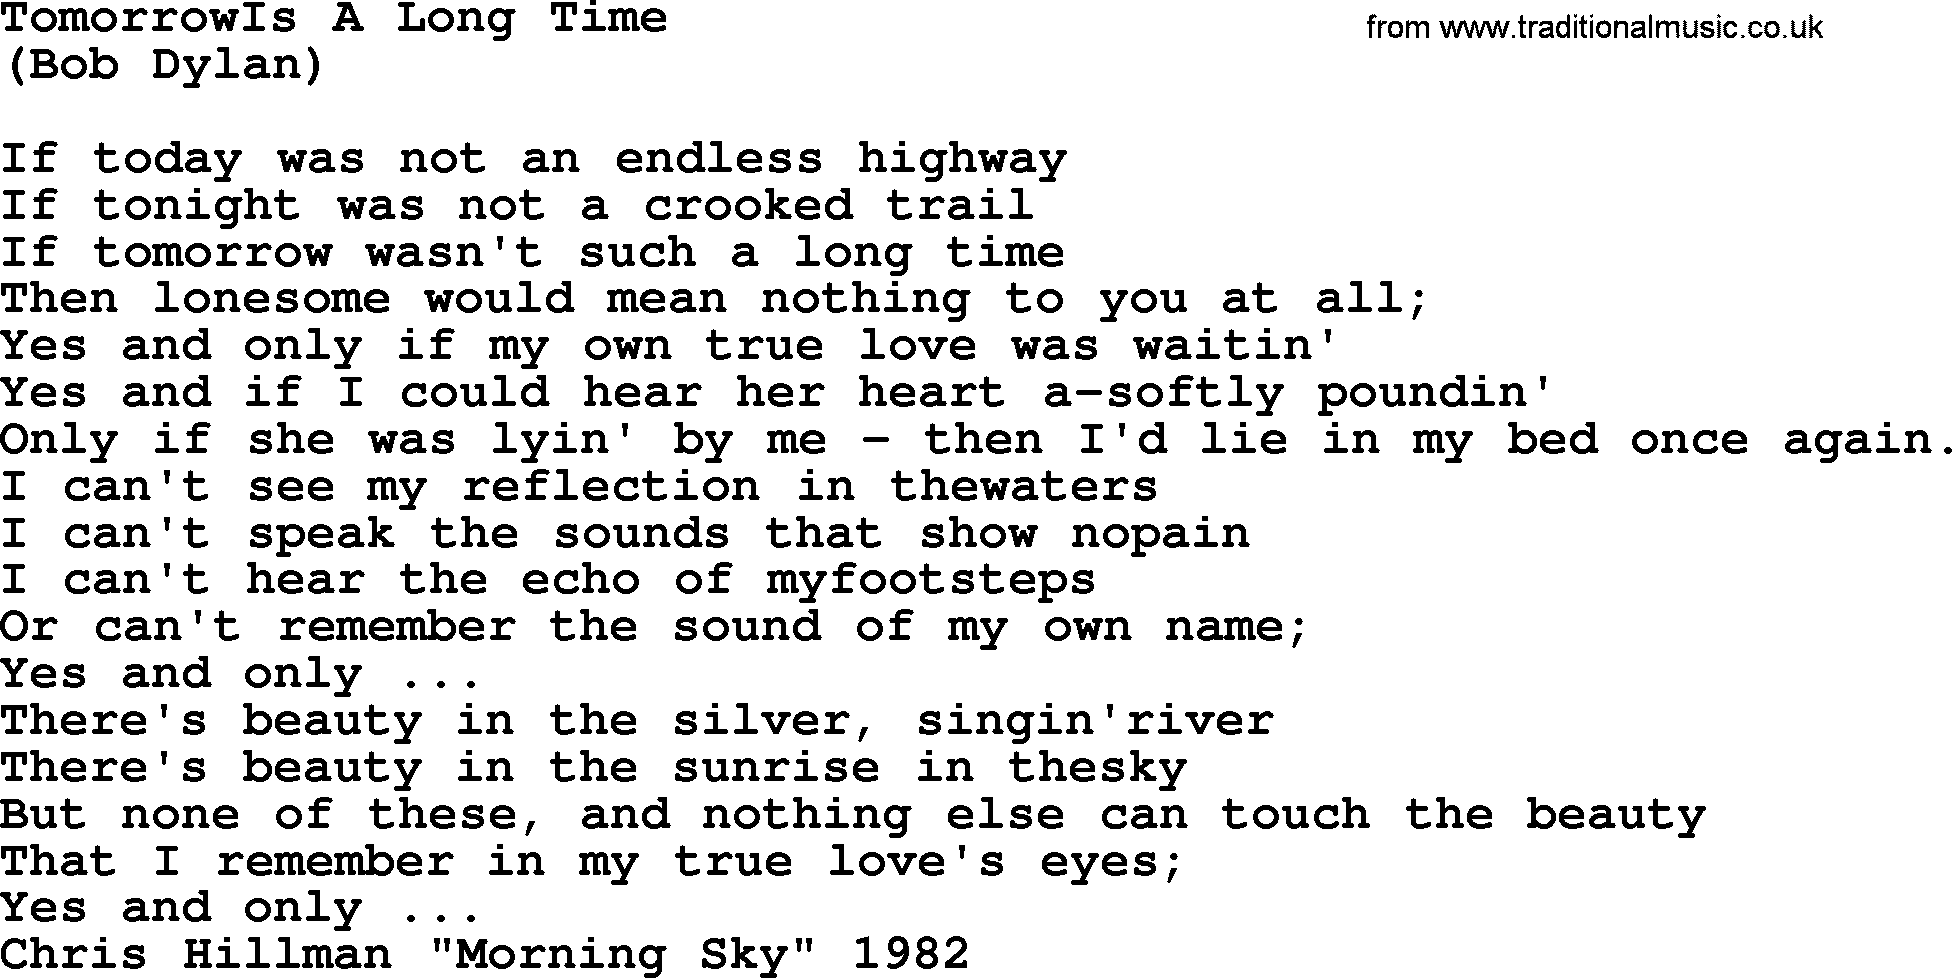 The Byrds song Tomorrowis A Long Time, lyrics